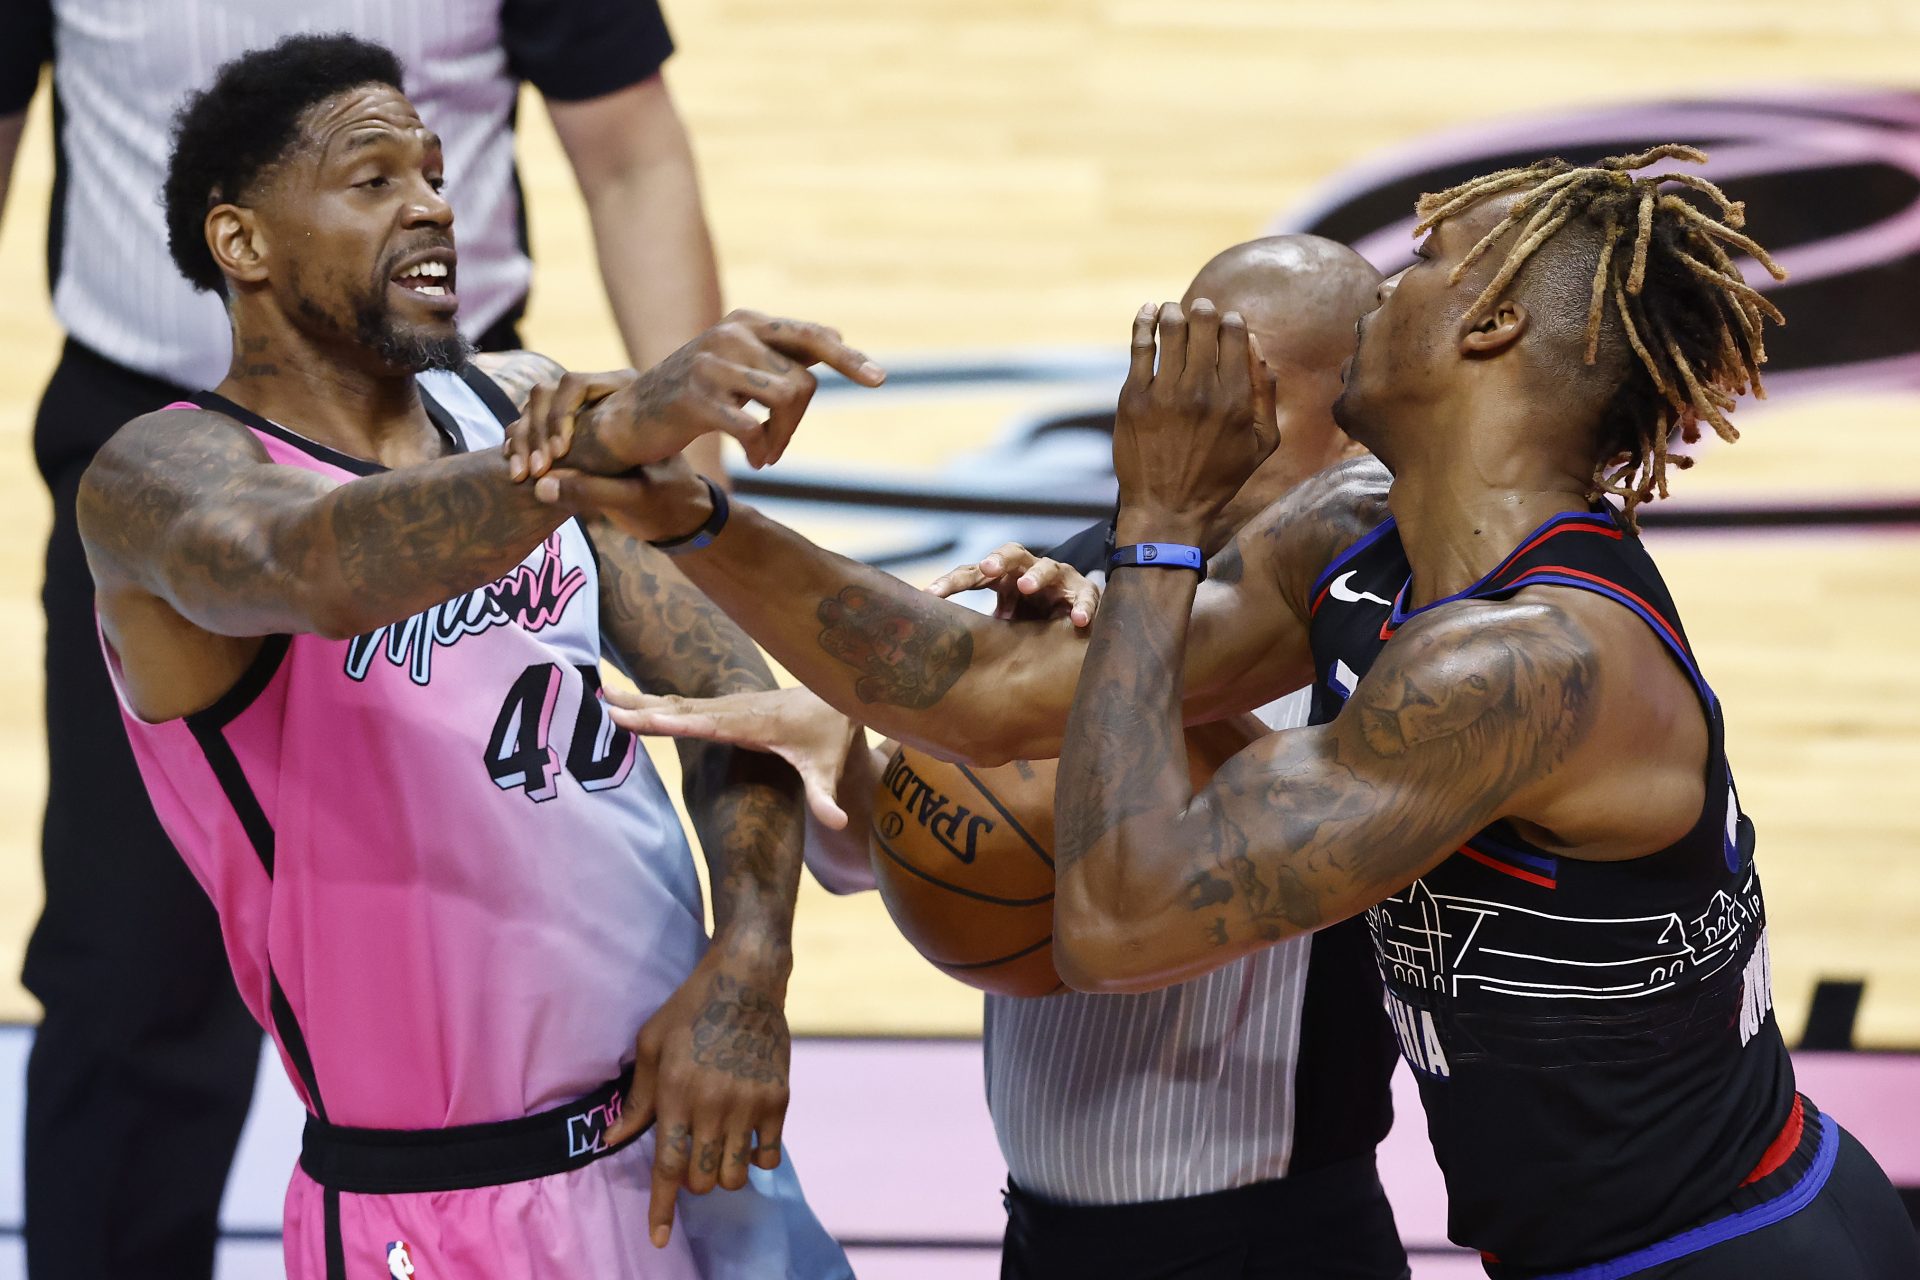 Video: Heat’s Udonis Haslem Ejected After Confronting 76ers’ Dwight Howard